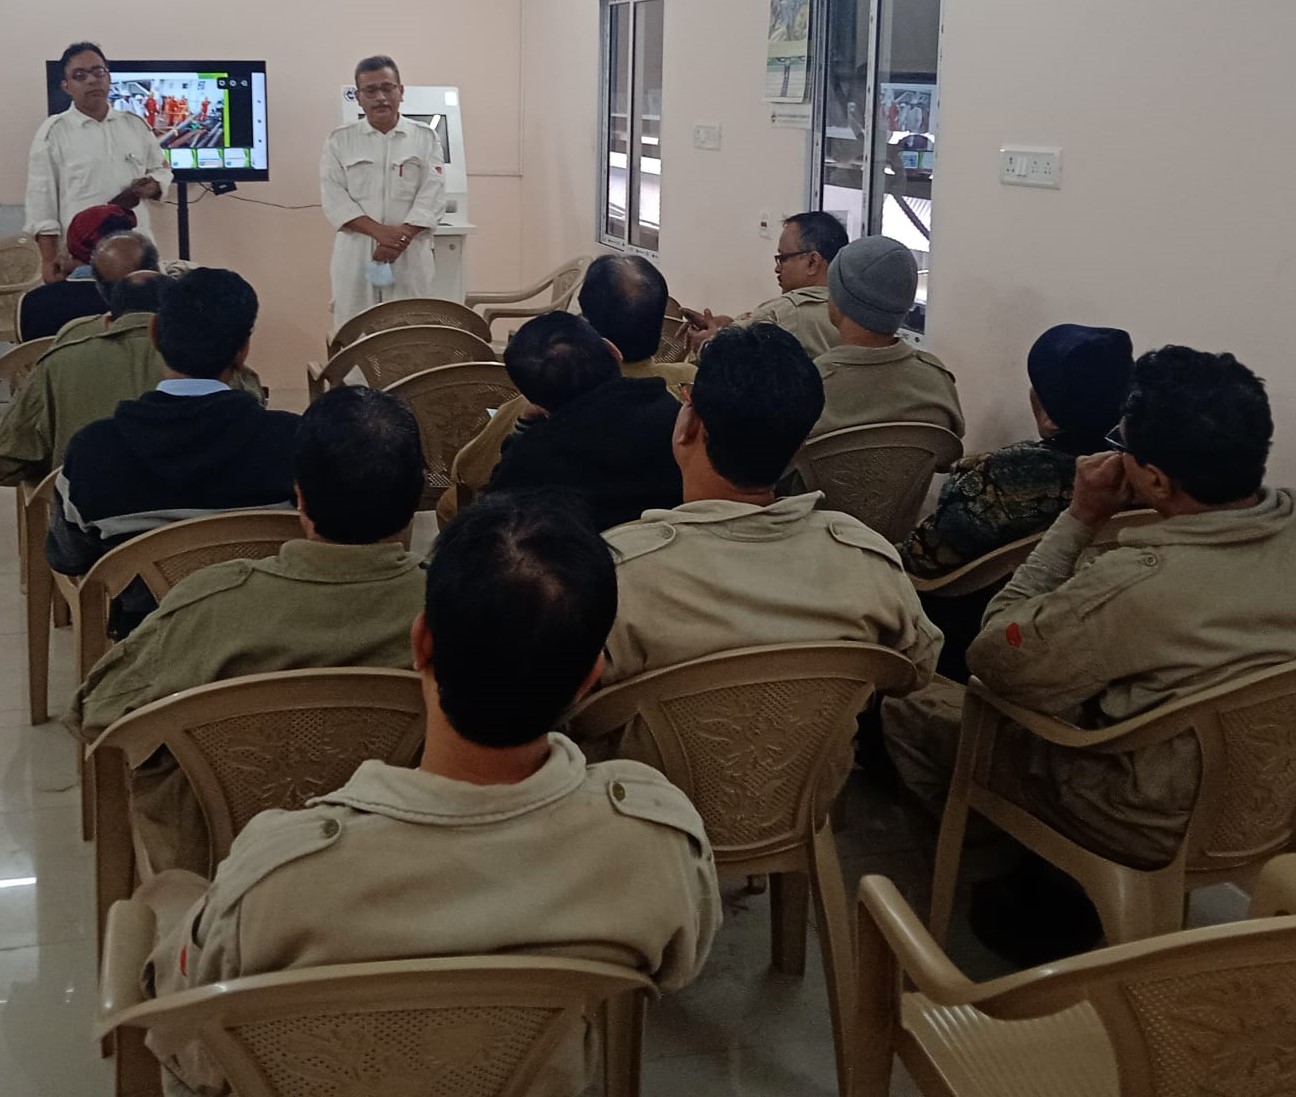 Safety training through GSTK for employees at Main Works 08, 15 and 22 Dec 22